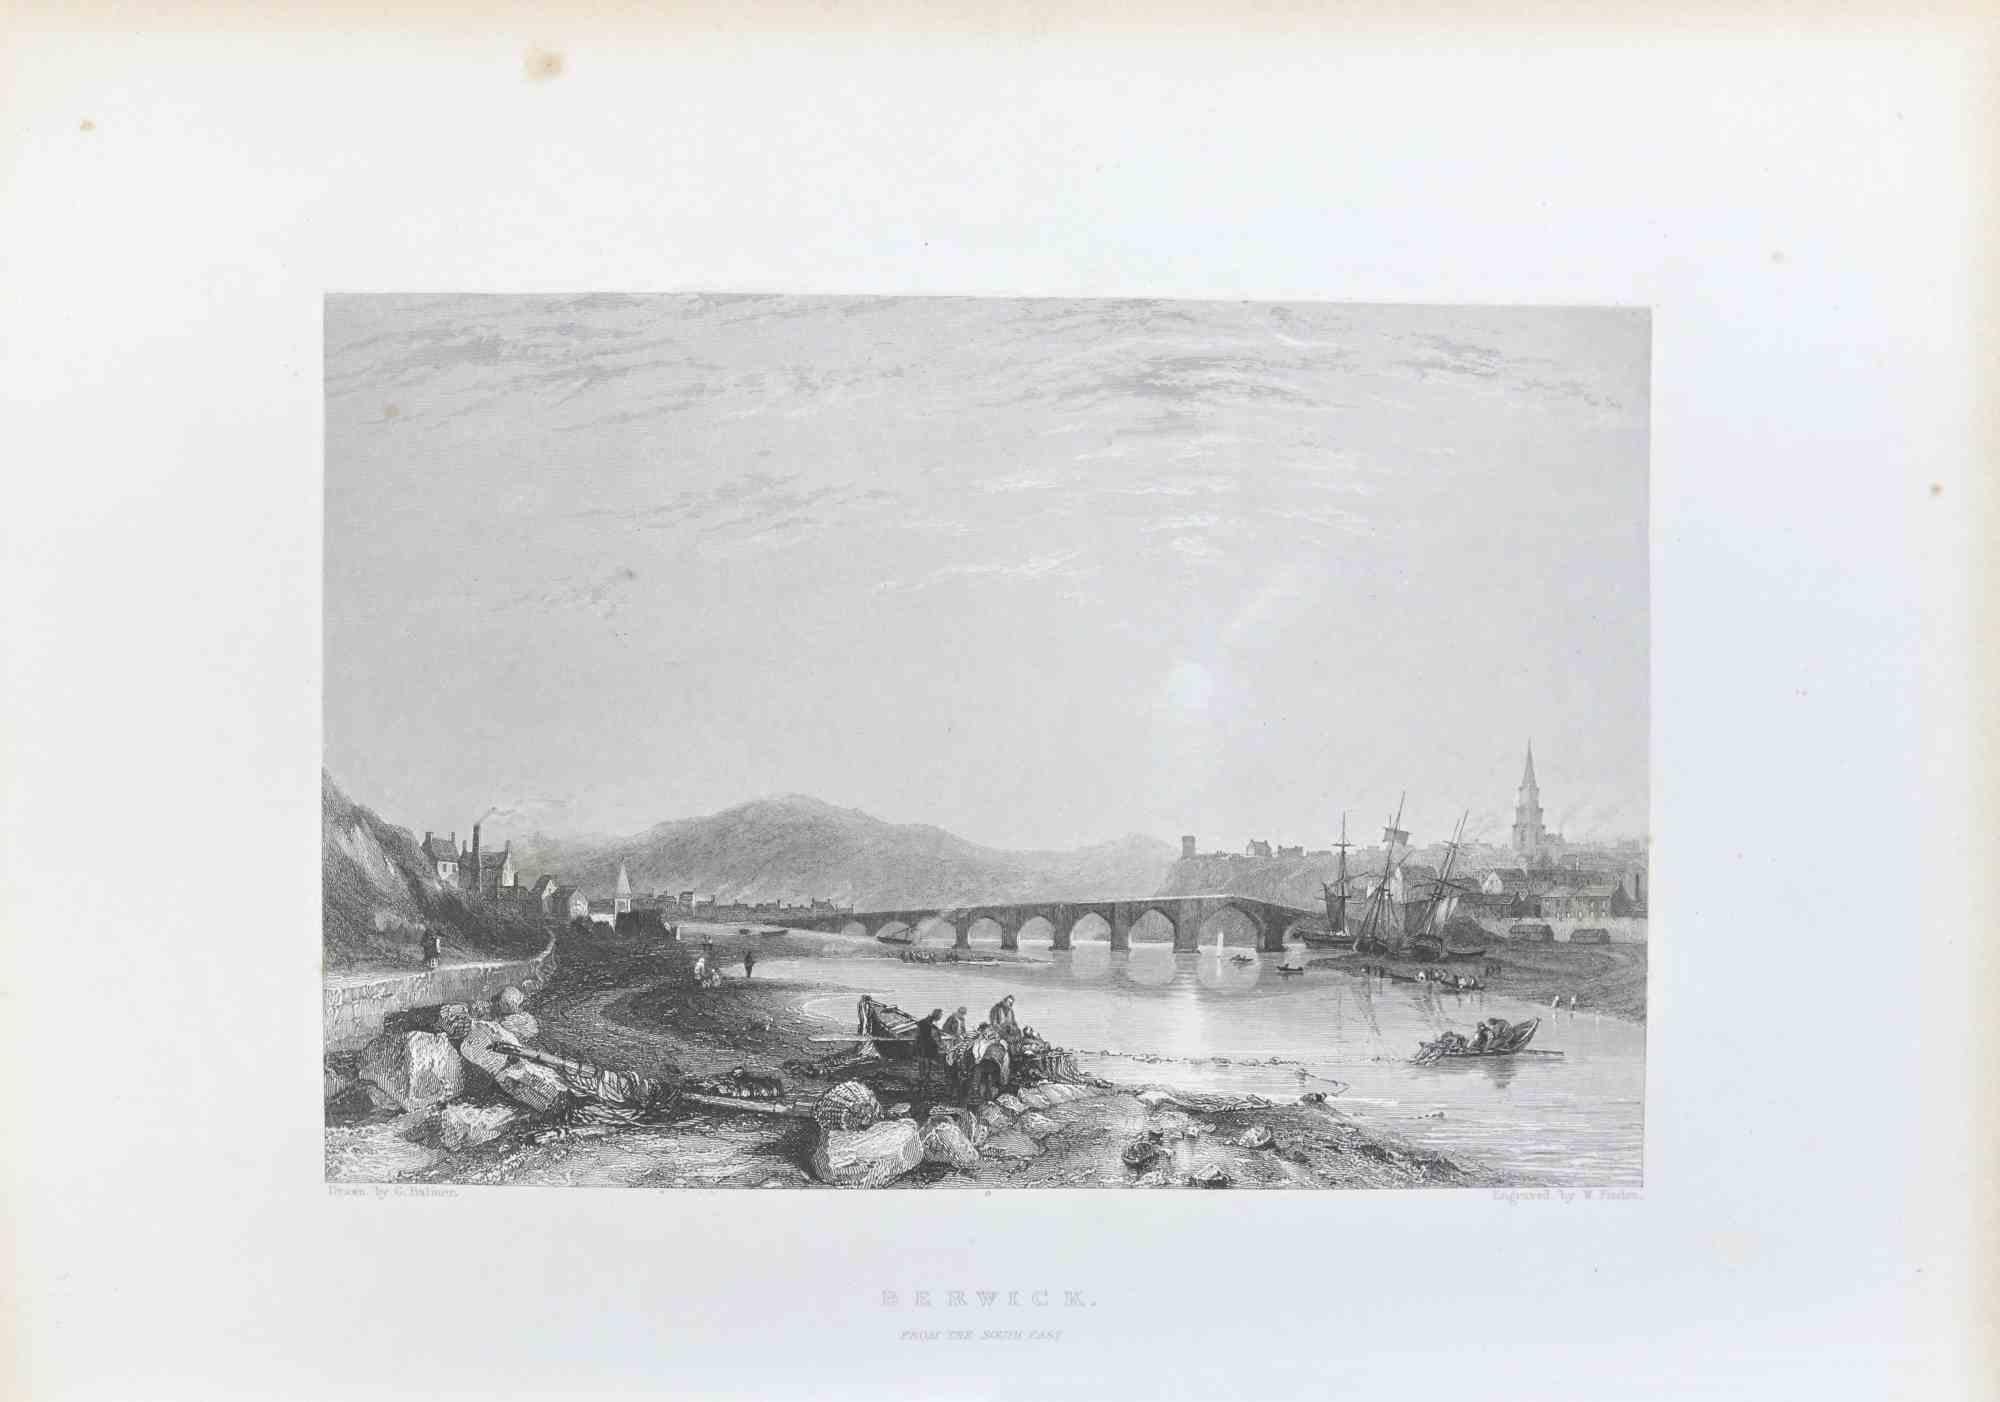 Berwick (from the South East) is a lithograph on paper realized by the artist George Balmer.

Signed on the plate on the lower left. Titled on the lower center. Engraved by W. Finden

The state of preservation is good, only a yellowed paper along